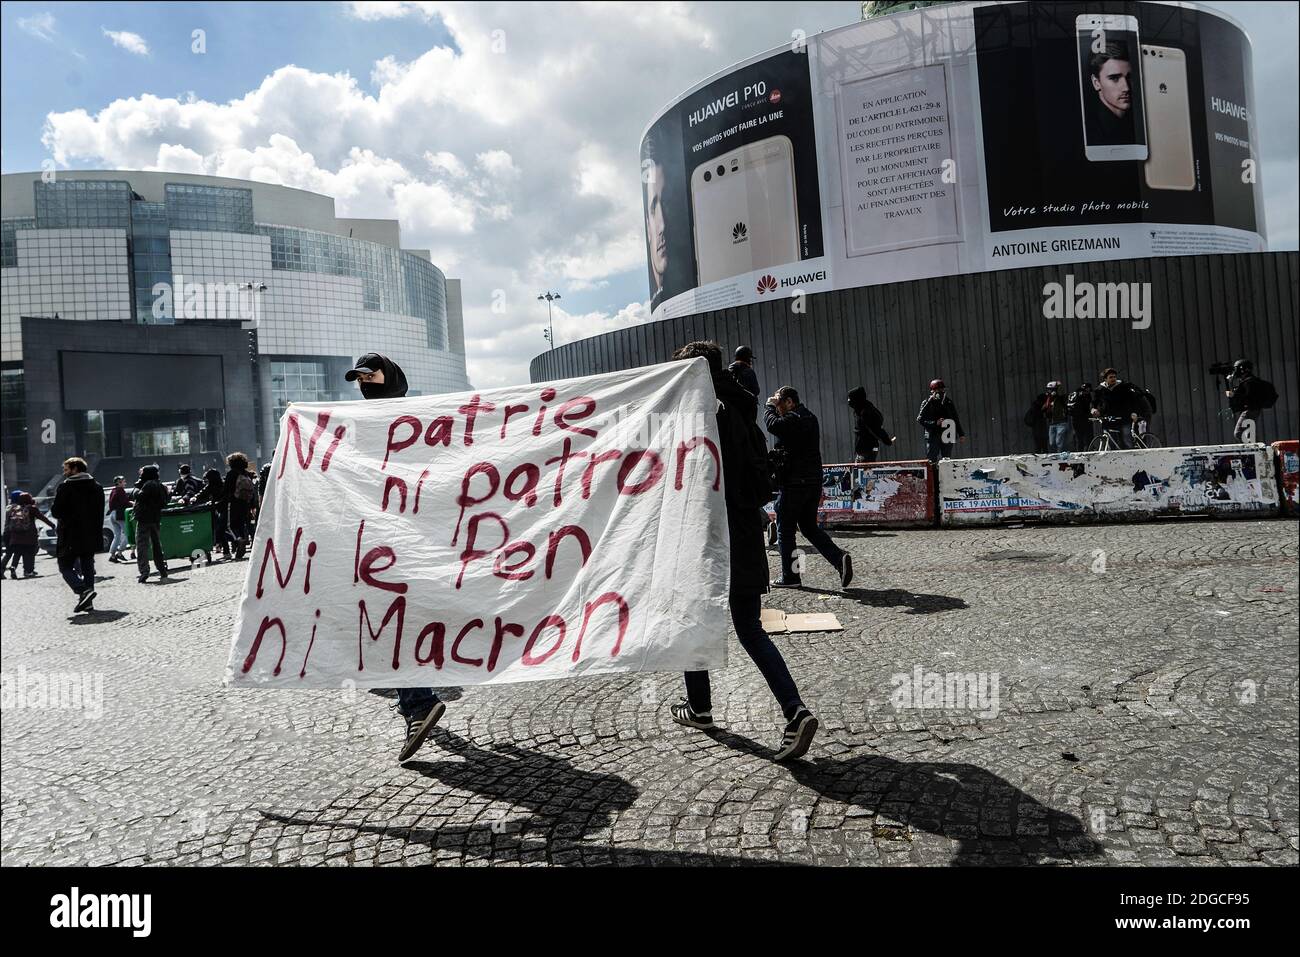 High school students march in Paris to protest against both French  presidential candidates centrit Emmanuel Macron and far-right Front  National Party leader Marine Le Pen in Paris, France, April 27, 2017. Photo